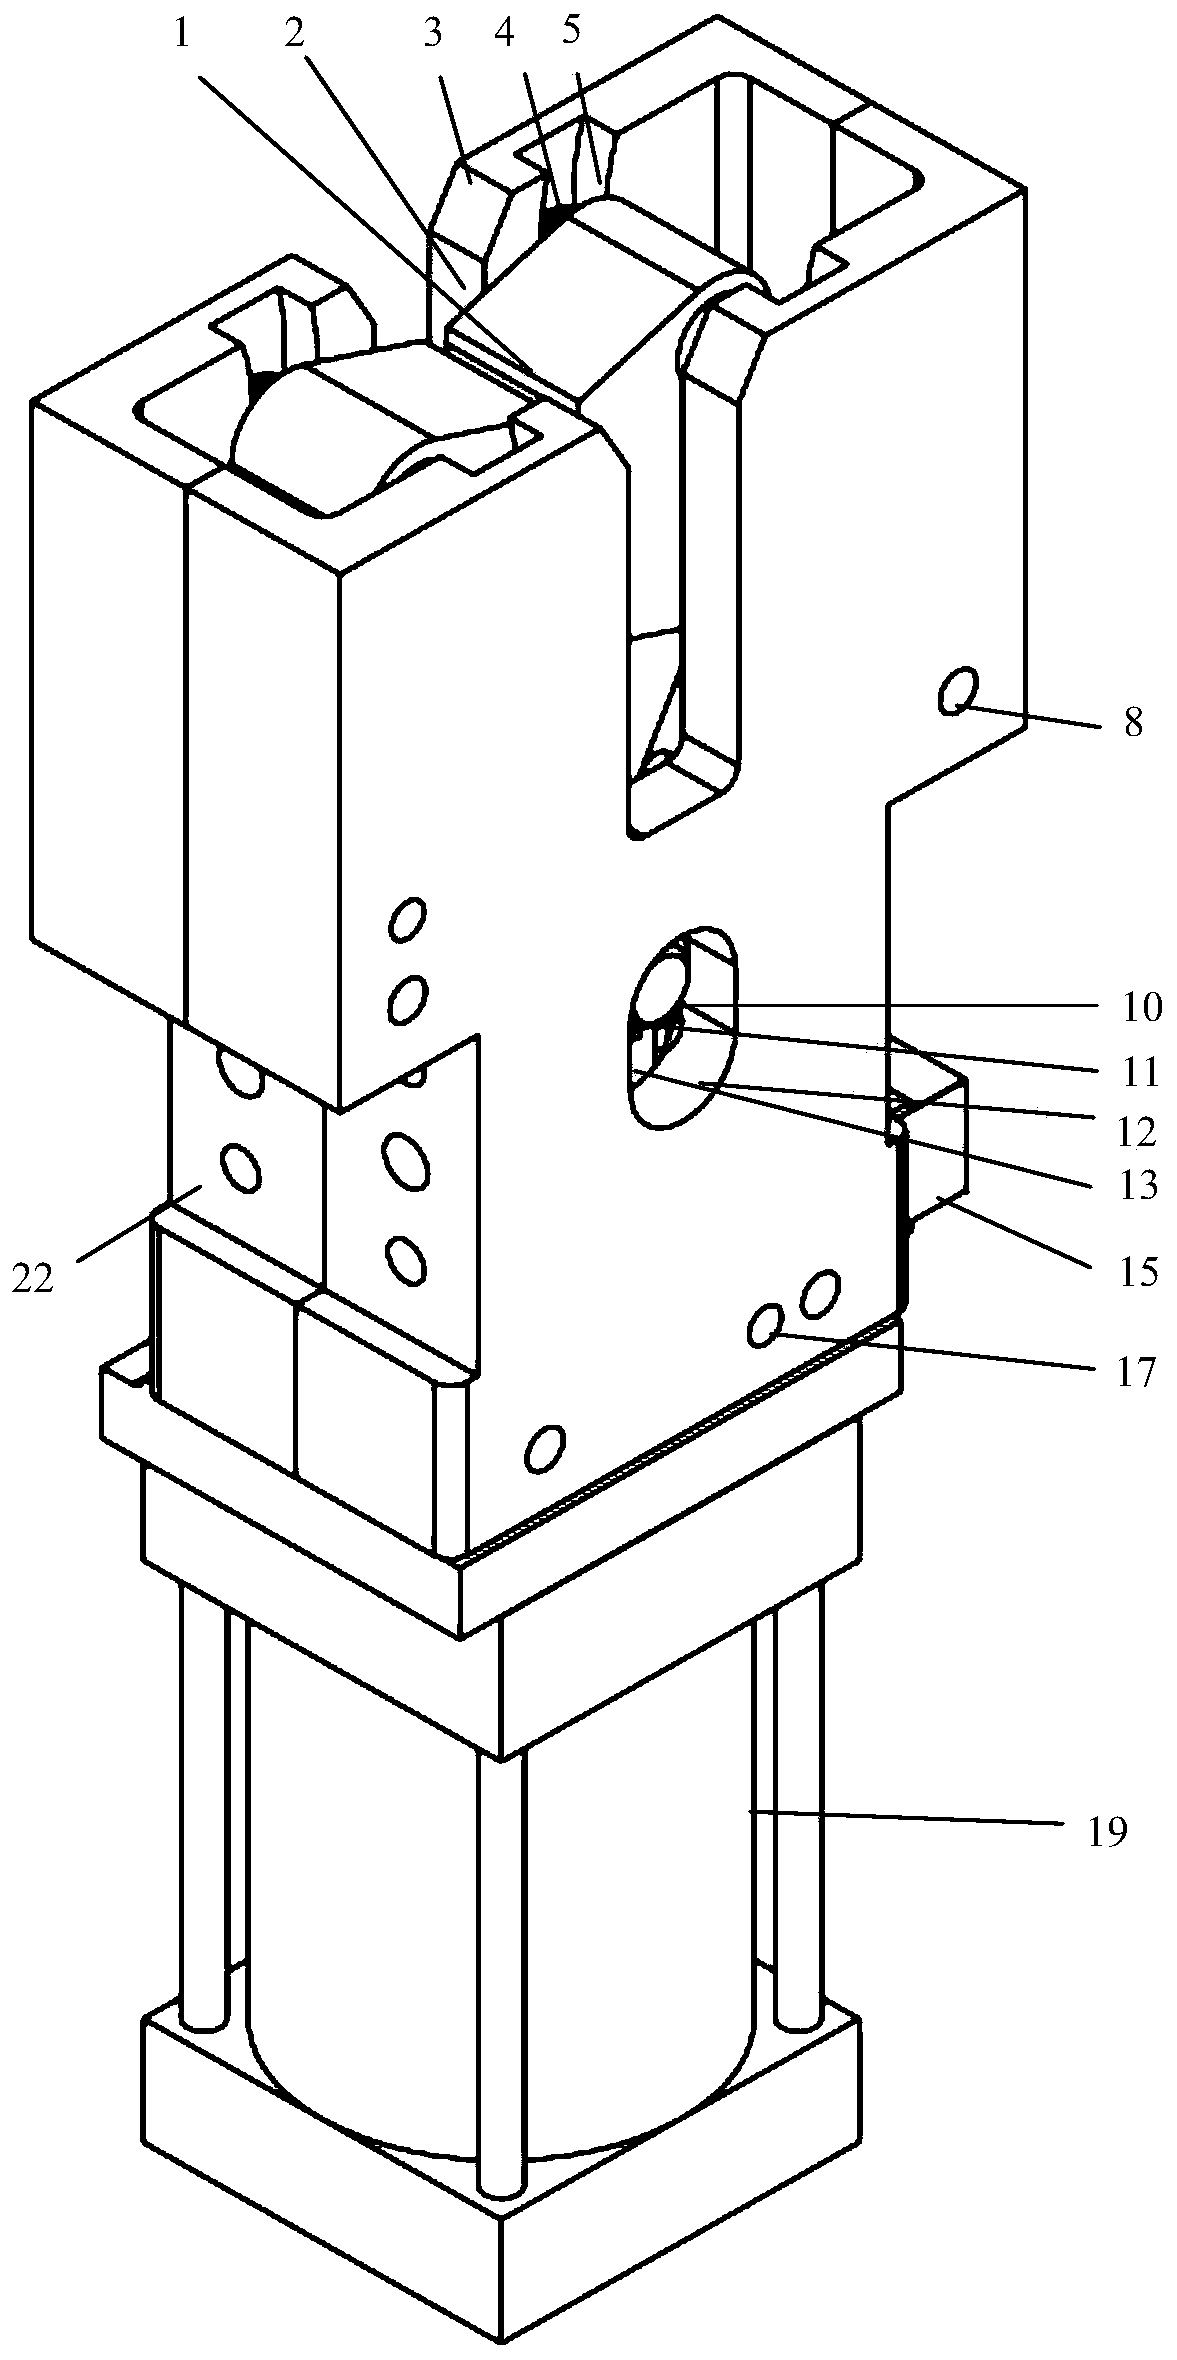 A chute-type robot gripper for shearing